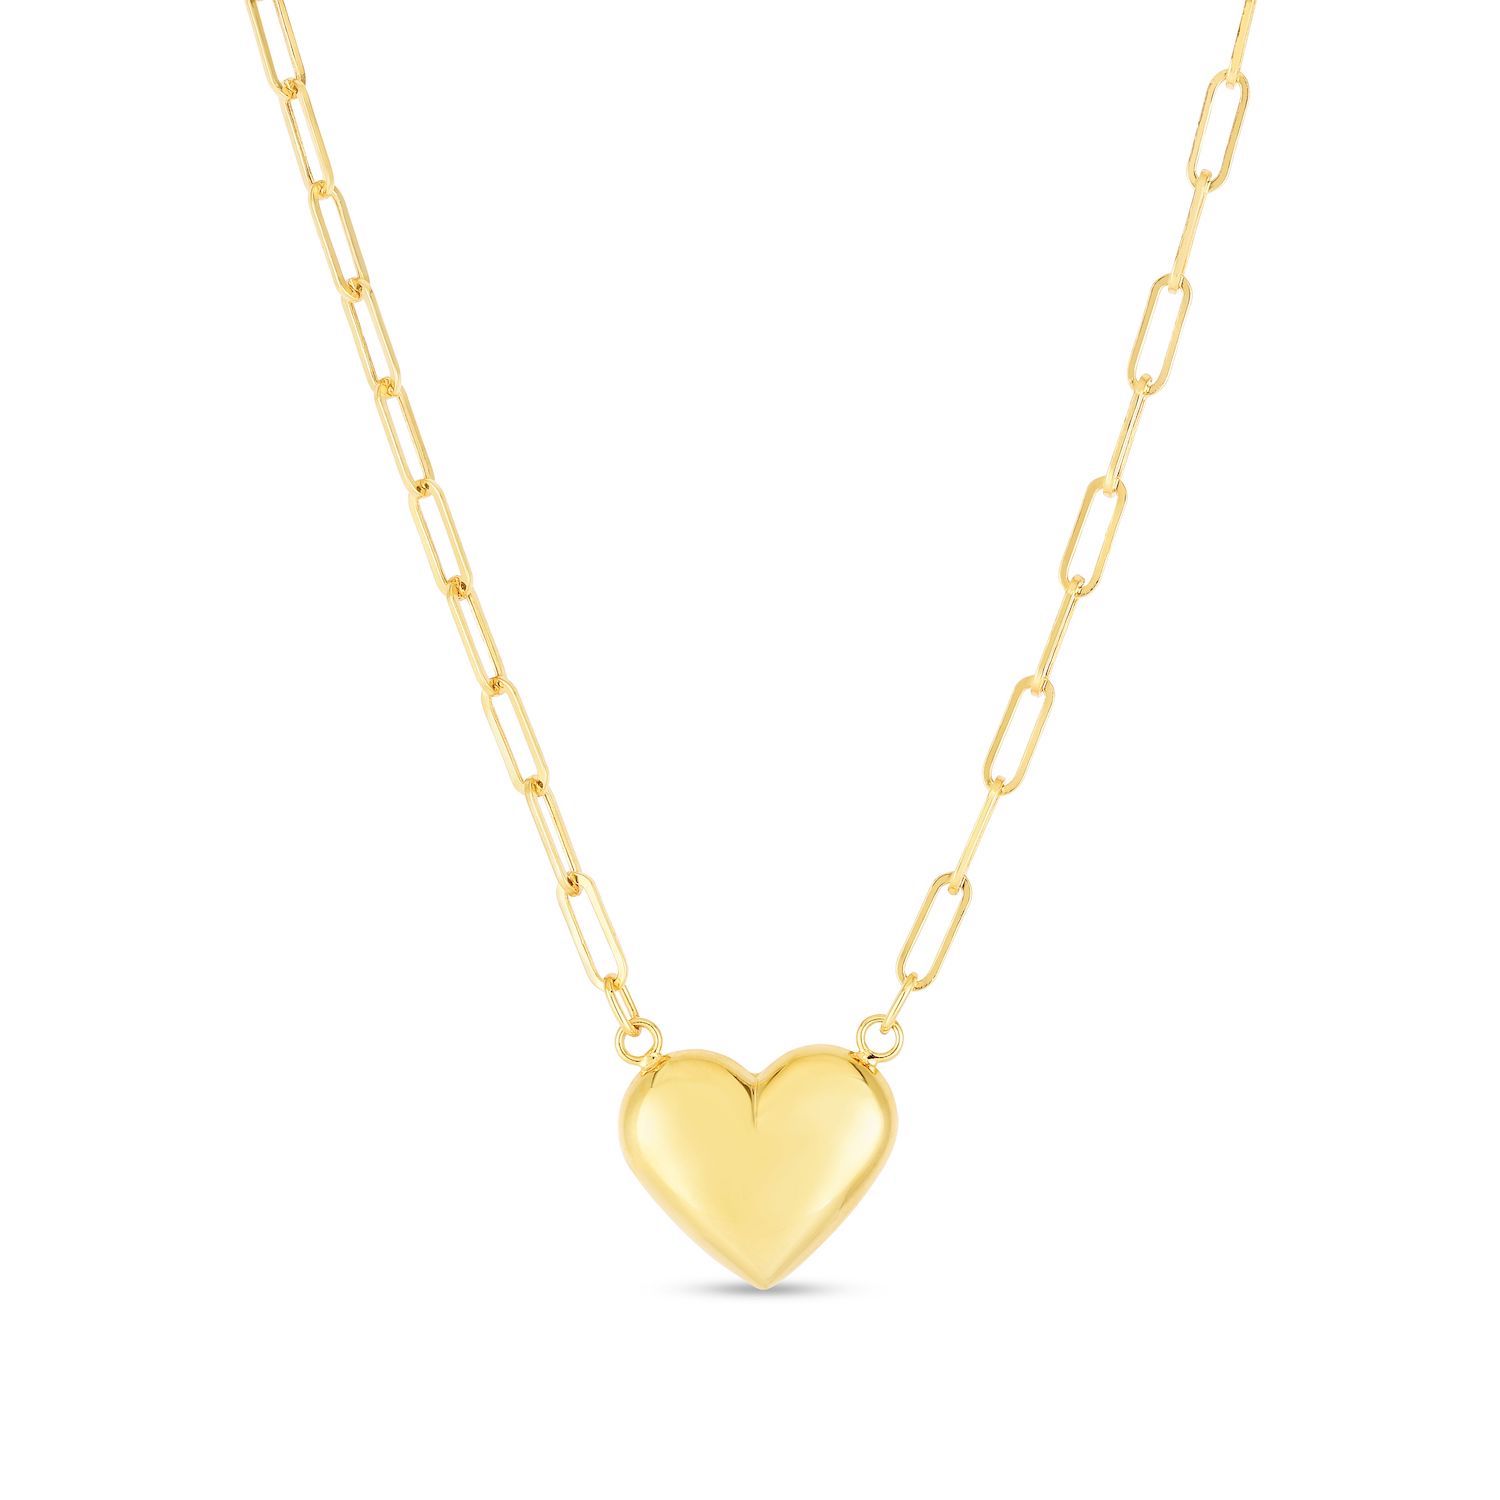 14K Yellow Gold Puffed Heart Pendant 2.5mm Paperclip Necklace 18"